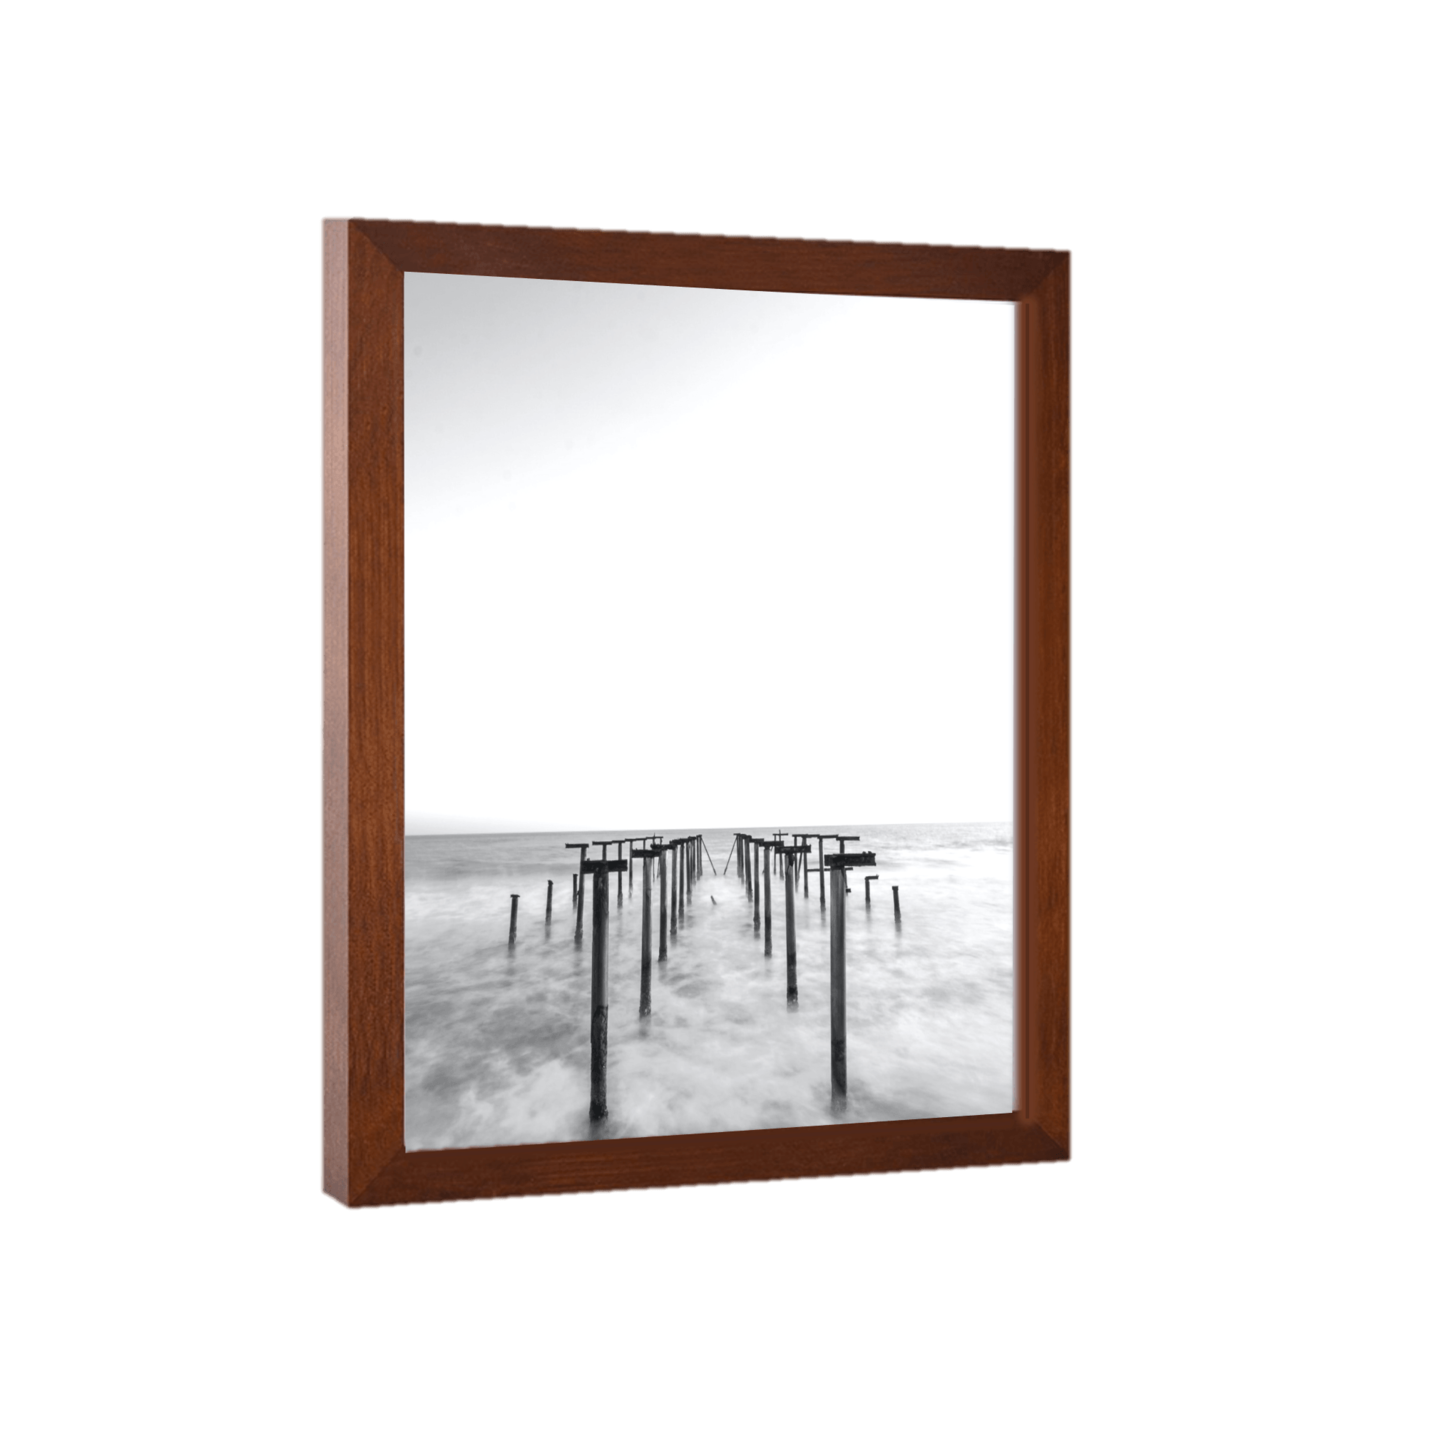 Gallery 17x20 Picture Frame Black 17x20 Frame 17 x 20 Poster Frames 17 x 20